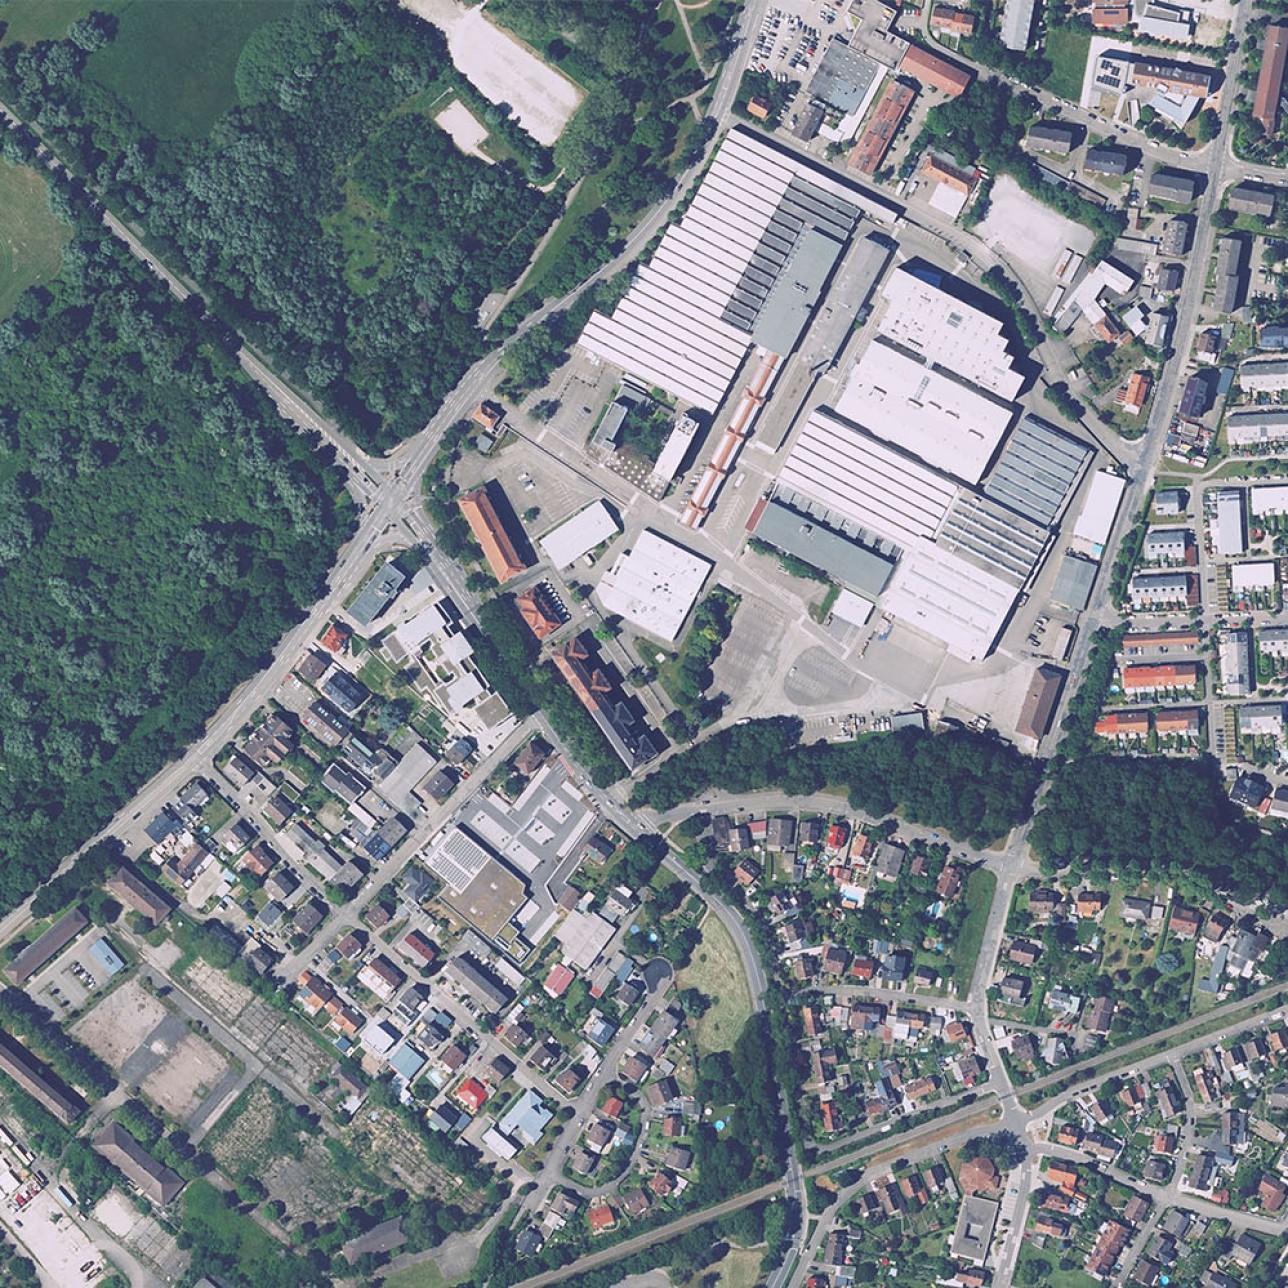 Aerial view of the Gettinge industrial estate